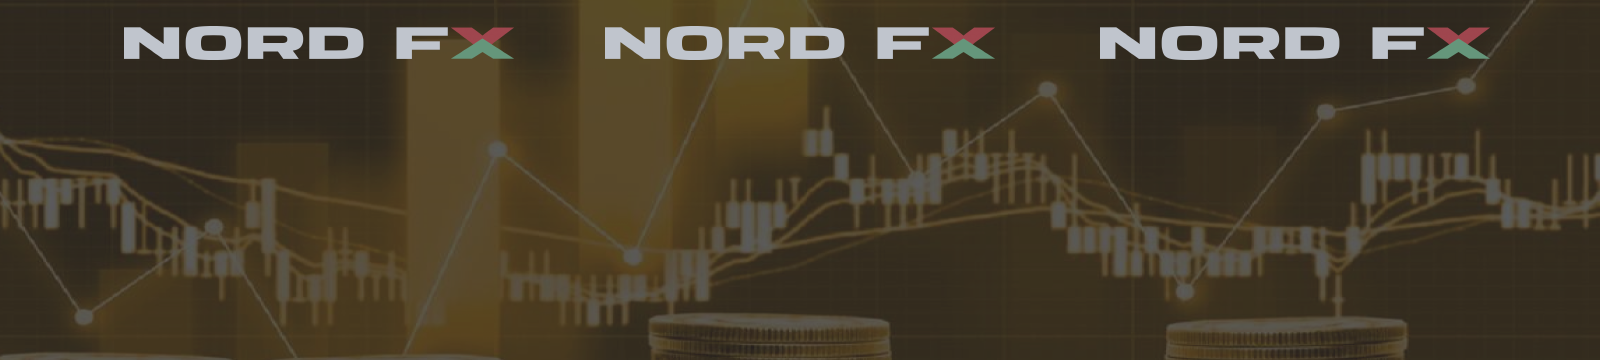 Forex and Cryptocurrencies Forecast for November 01-05, 2021